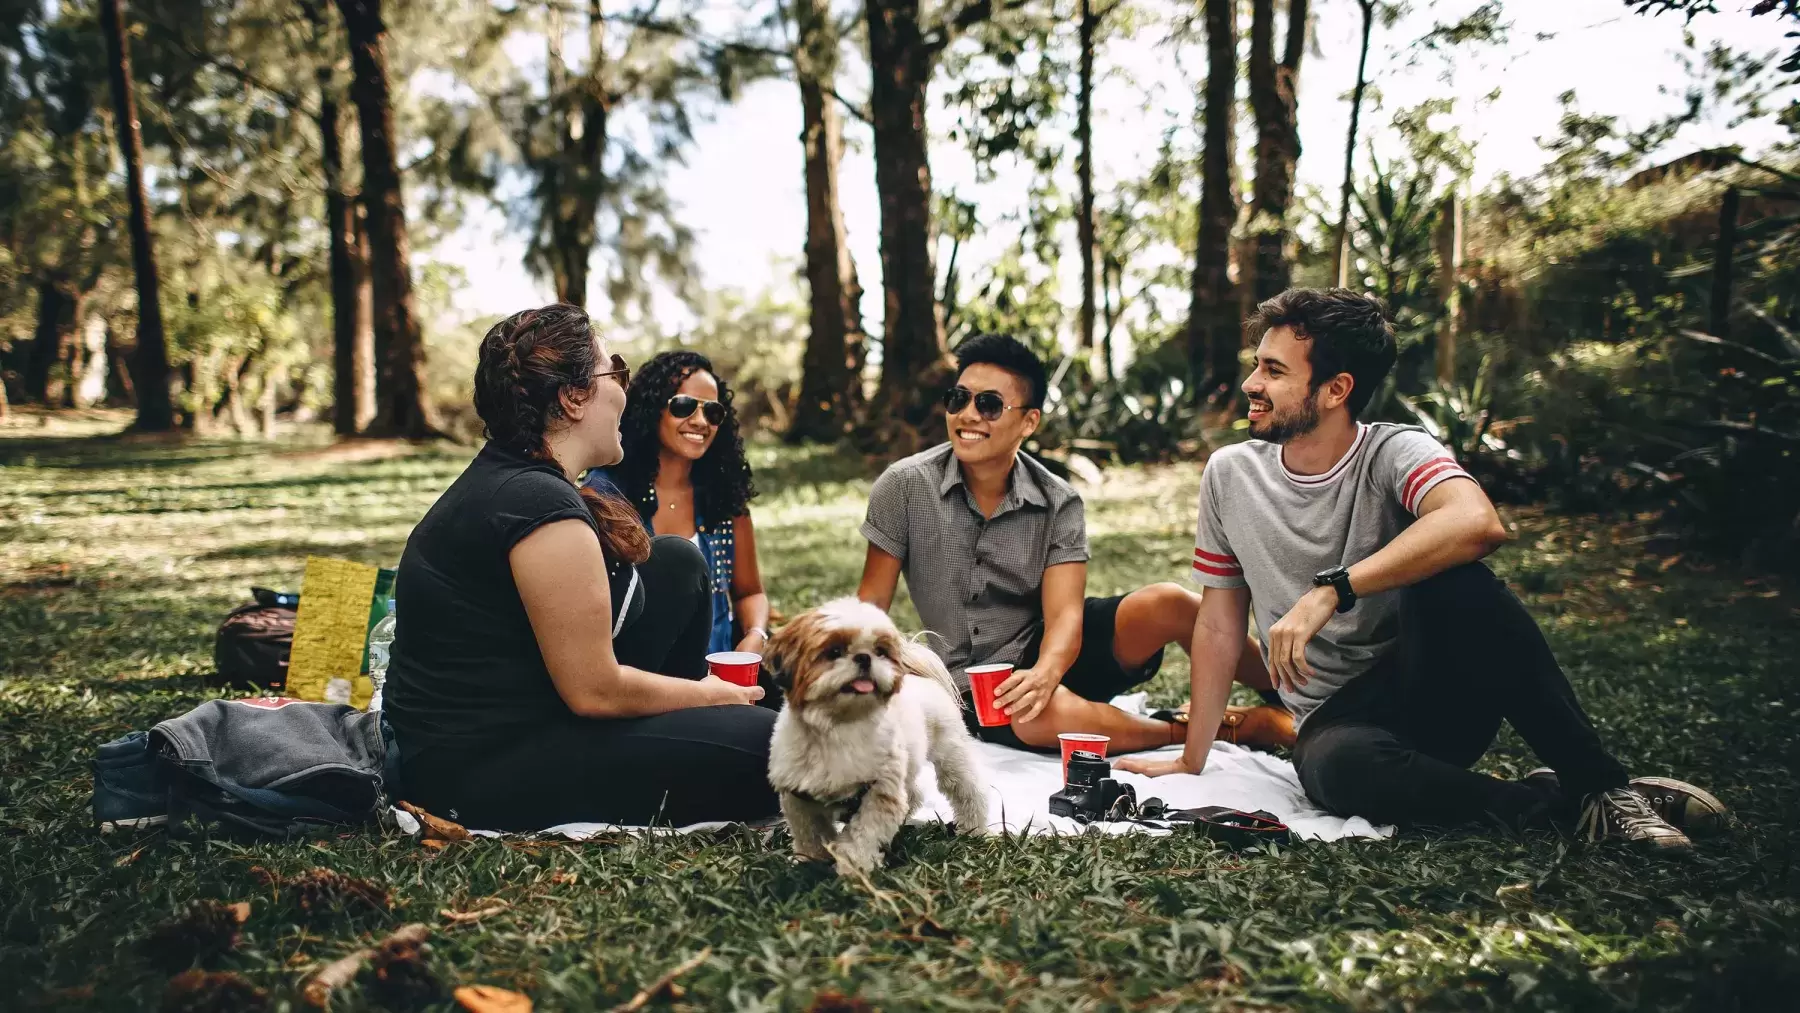 group of people and dog sitting on a blanket in a wooded area eating and drinking